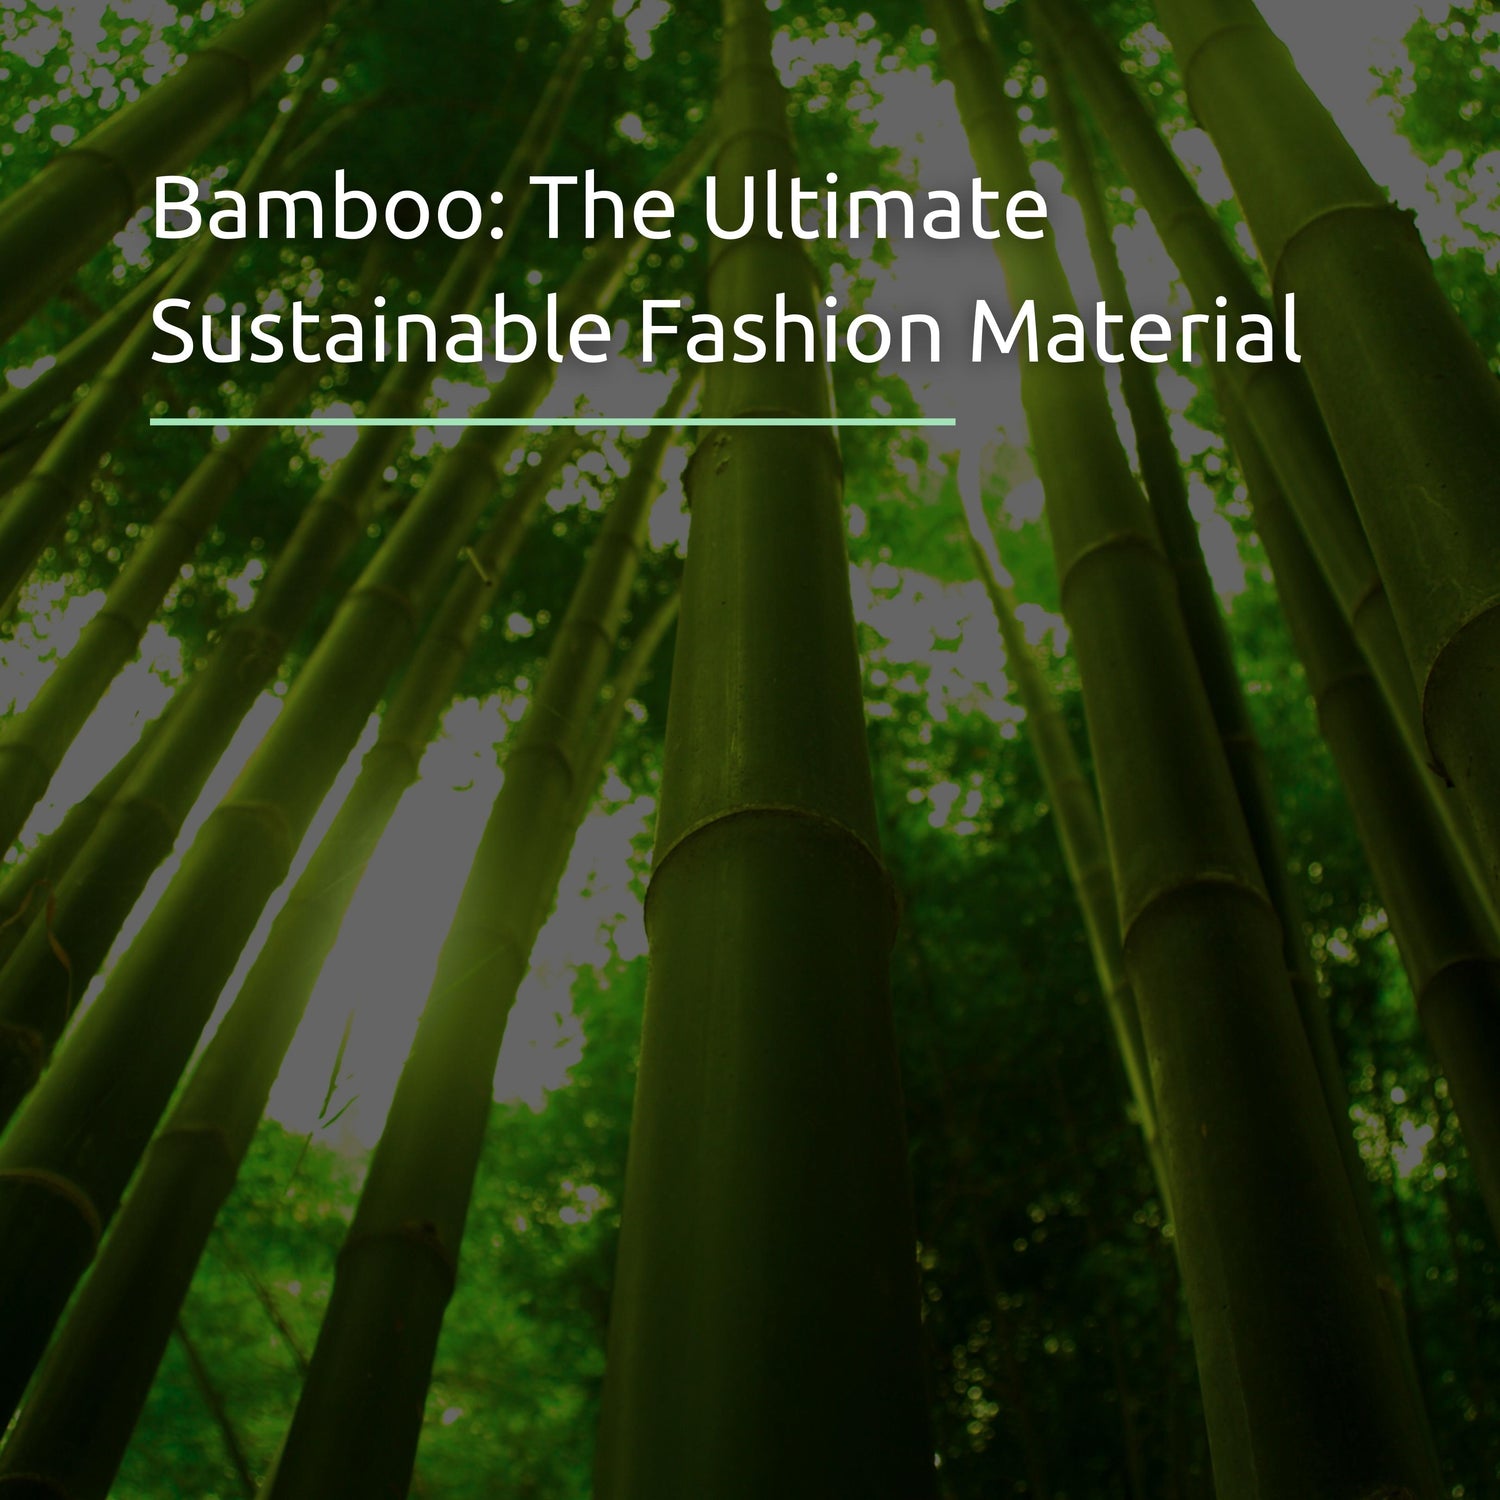 Bamboo: The Ultimate Sustainable Fashion Material